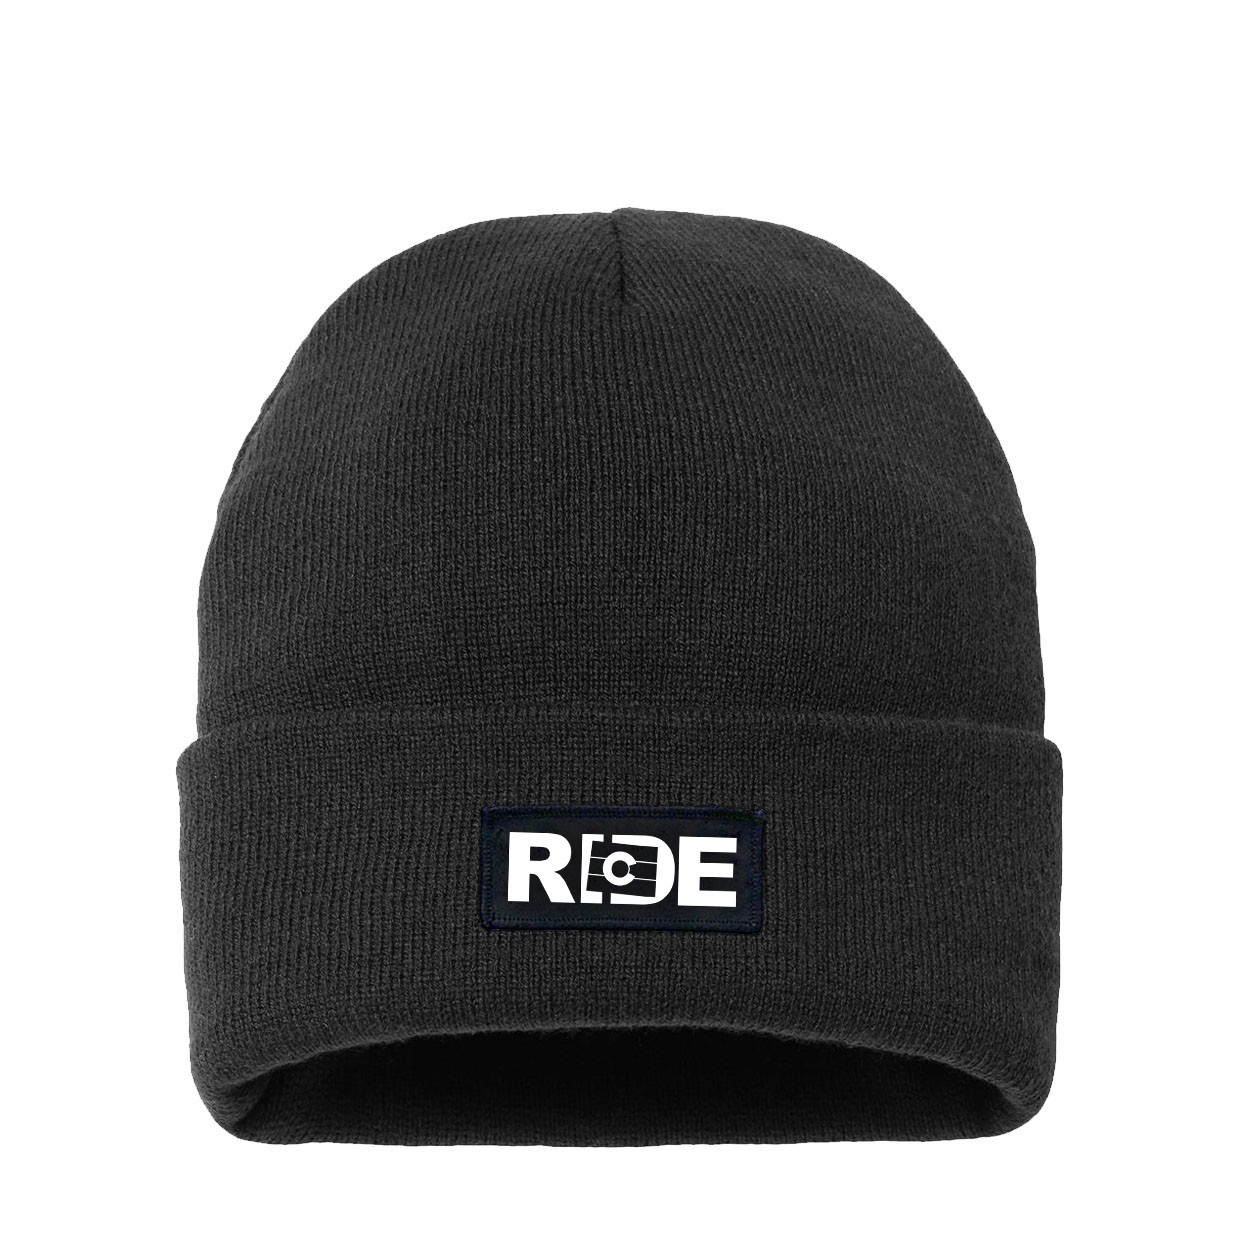 Ride Colorado Night Out Woven Patch Night Out Sherpa Lined Cuffed Beanie Black (White Logo)